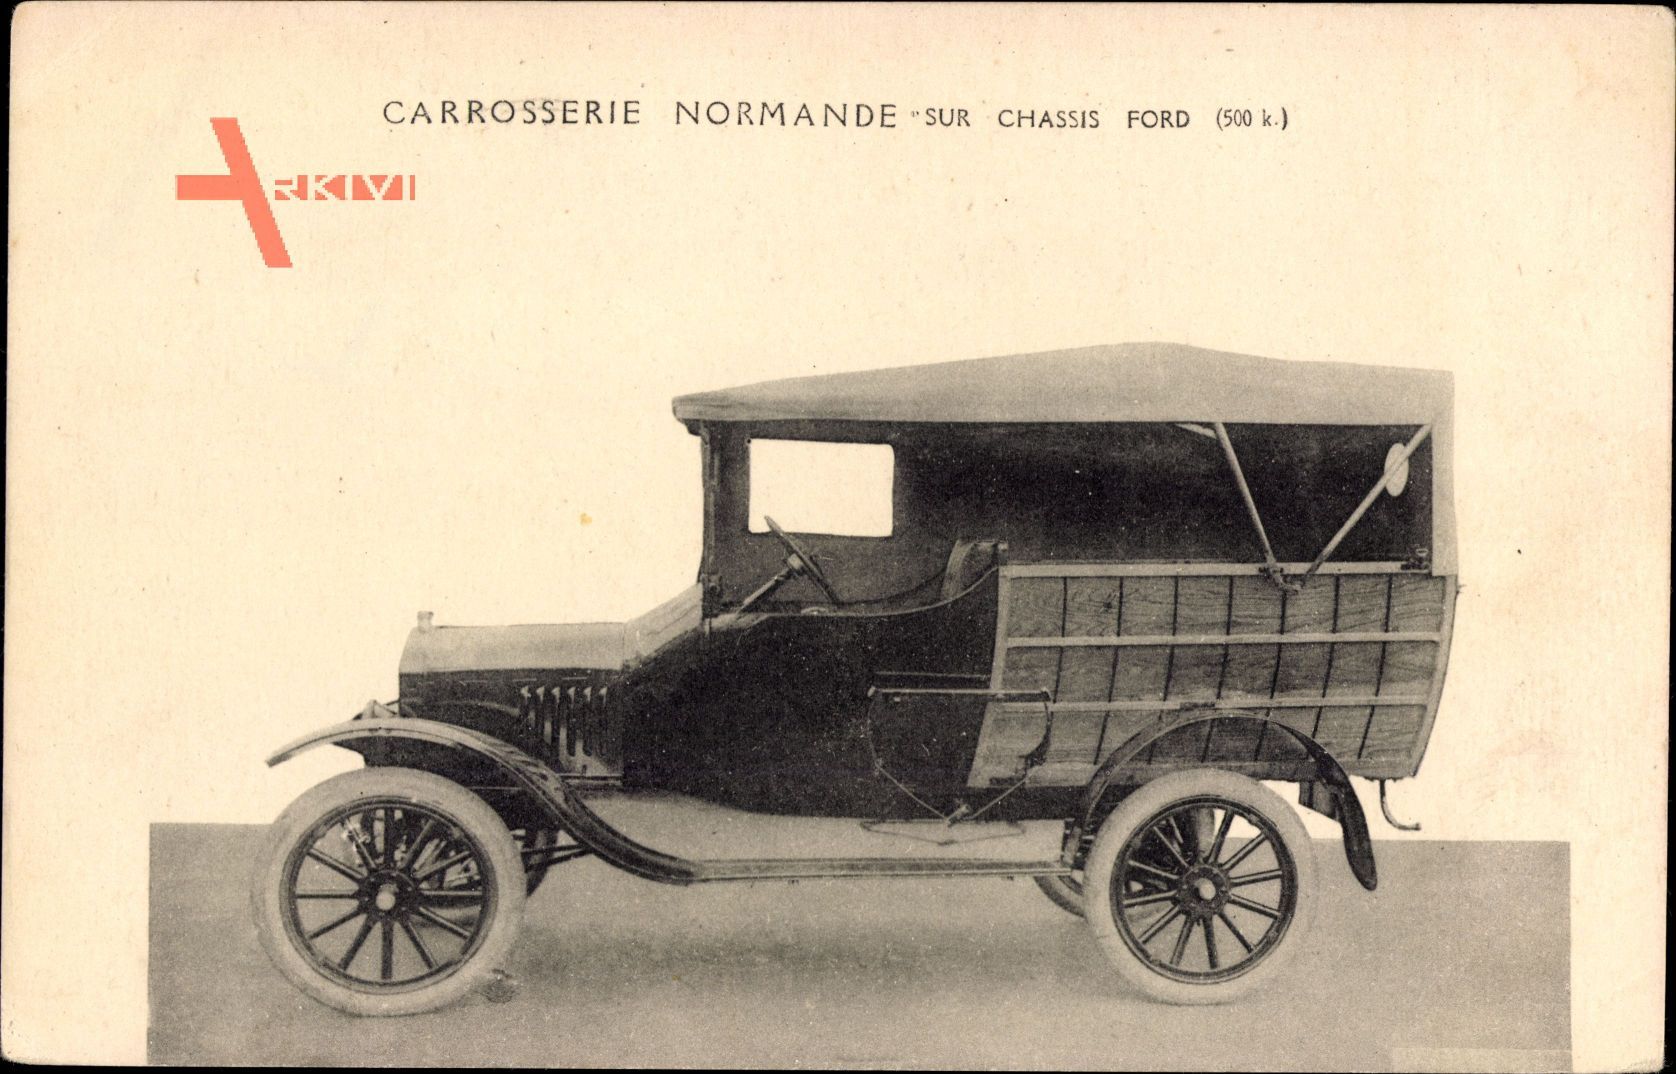 Carrosserie Normande sur chassis Ford, Automobil, Holzverkleidung